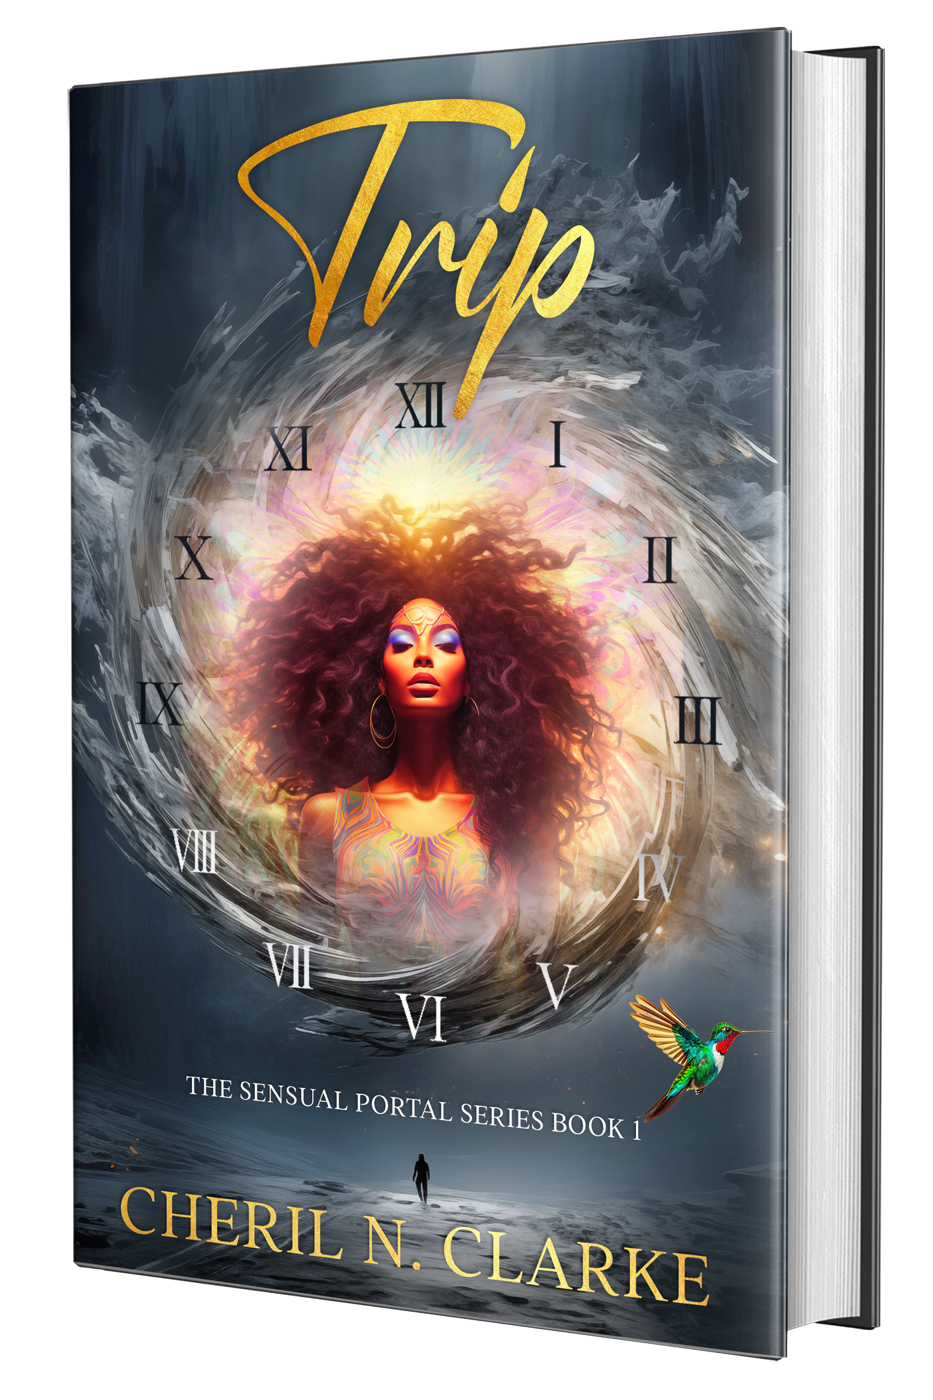 "Trip" *Autographed Print Book* (Book 1 in "The Sensual Portal" series)